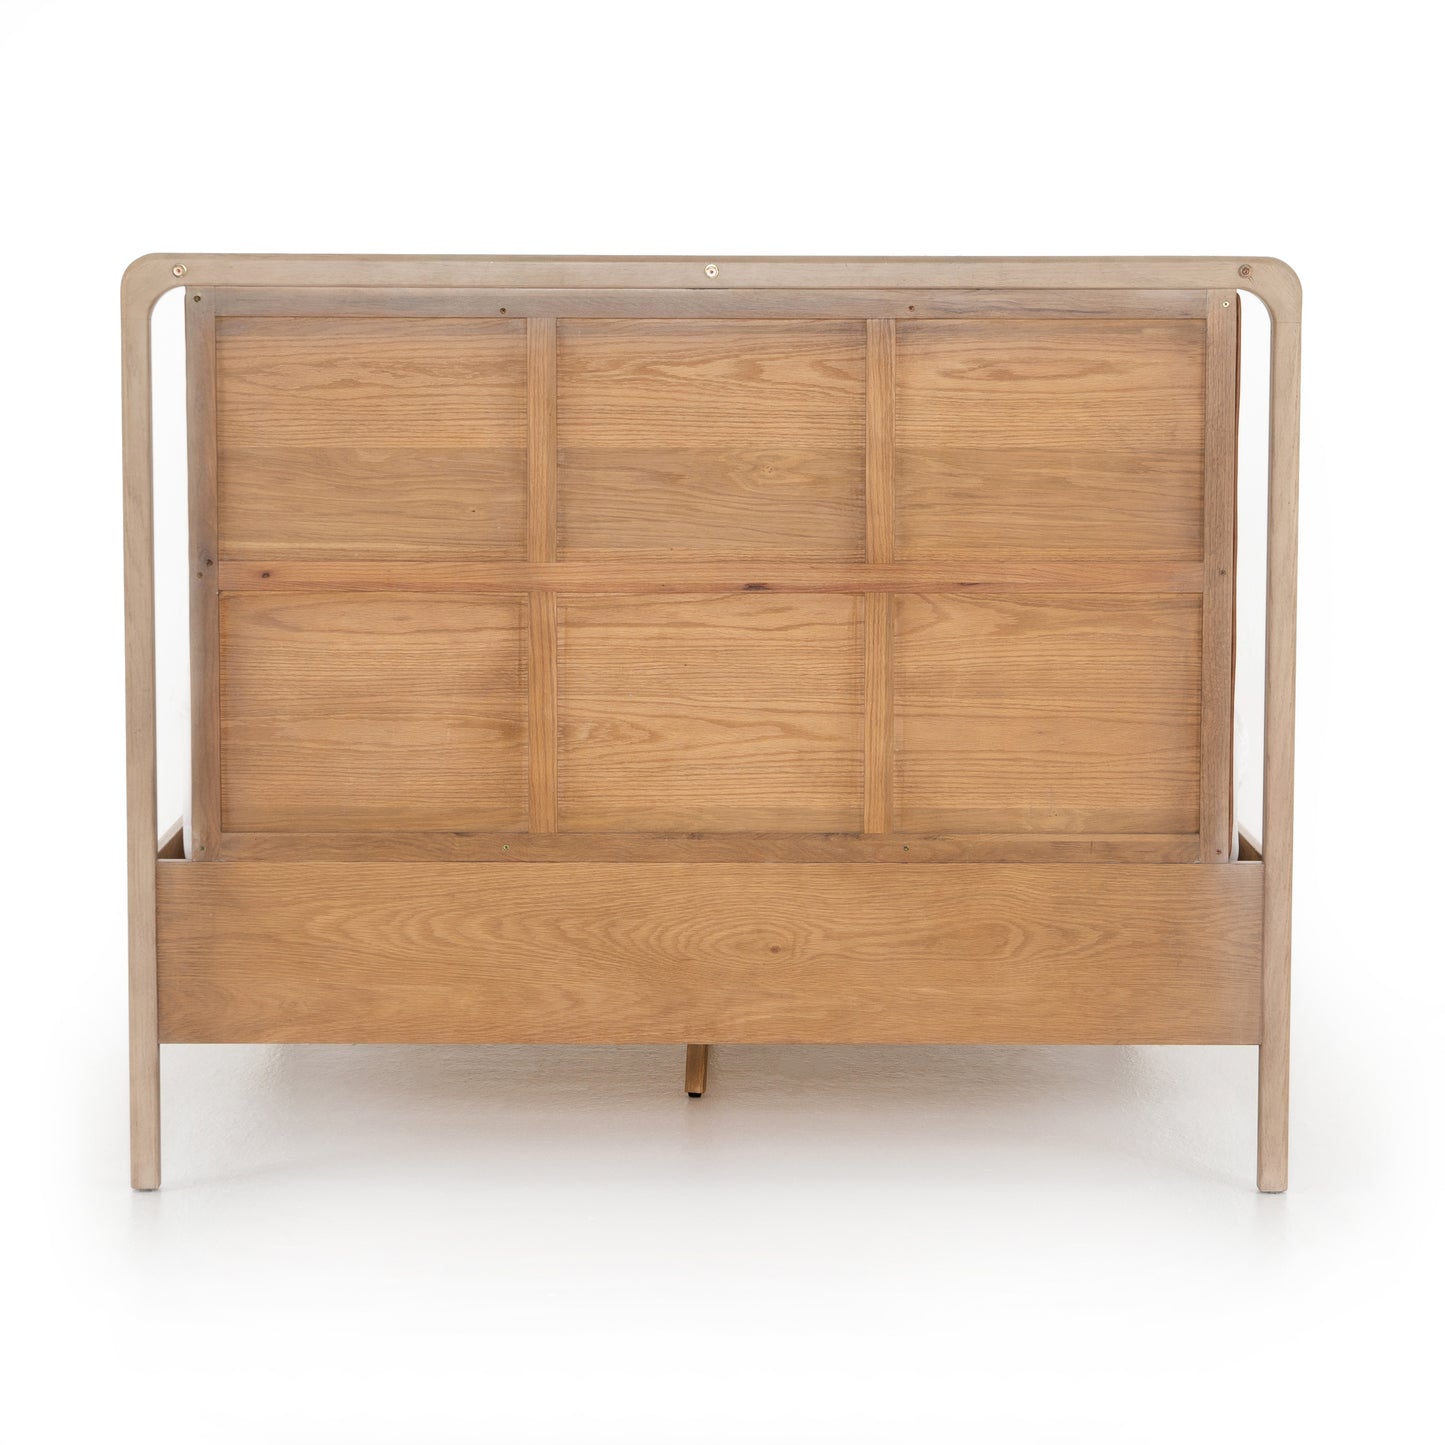 Load image into Gallery viewer, Rosedale Bed Bedding Four Hands     Four Hands, Burke Decor, Mid Century Modern Furniture, Old Bones Furniture Company, Old Bones Co, Modern Mid Century, Designer Furniture, https://www.oldbonesco.com/
